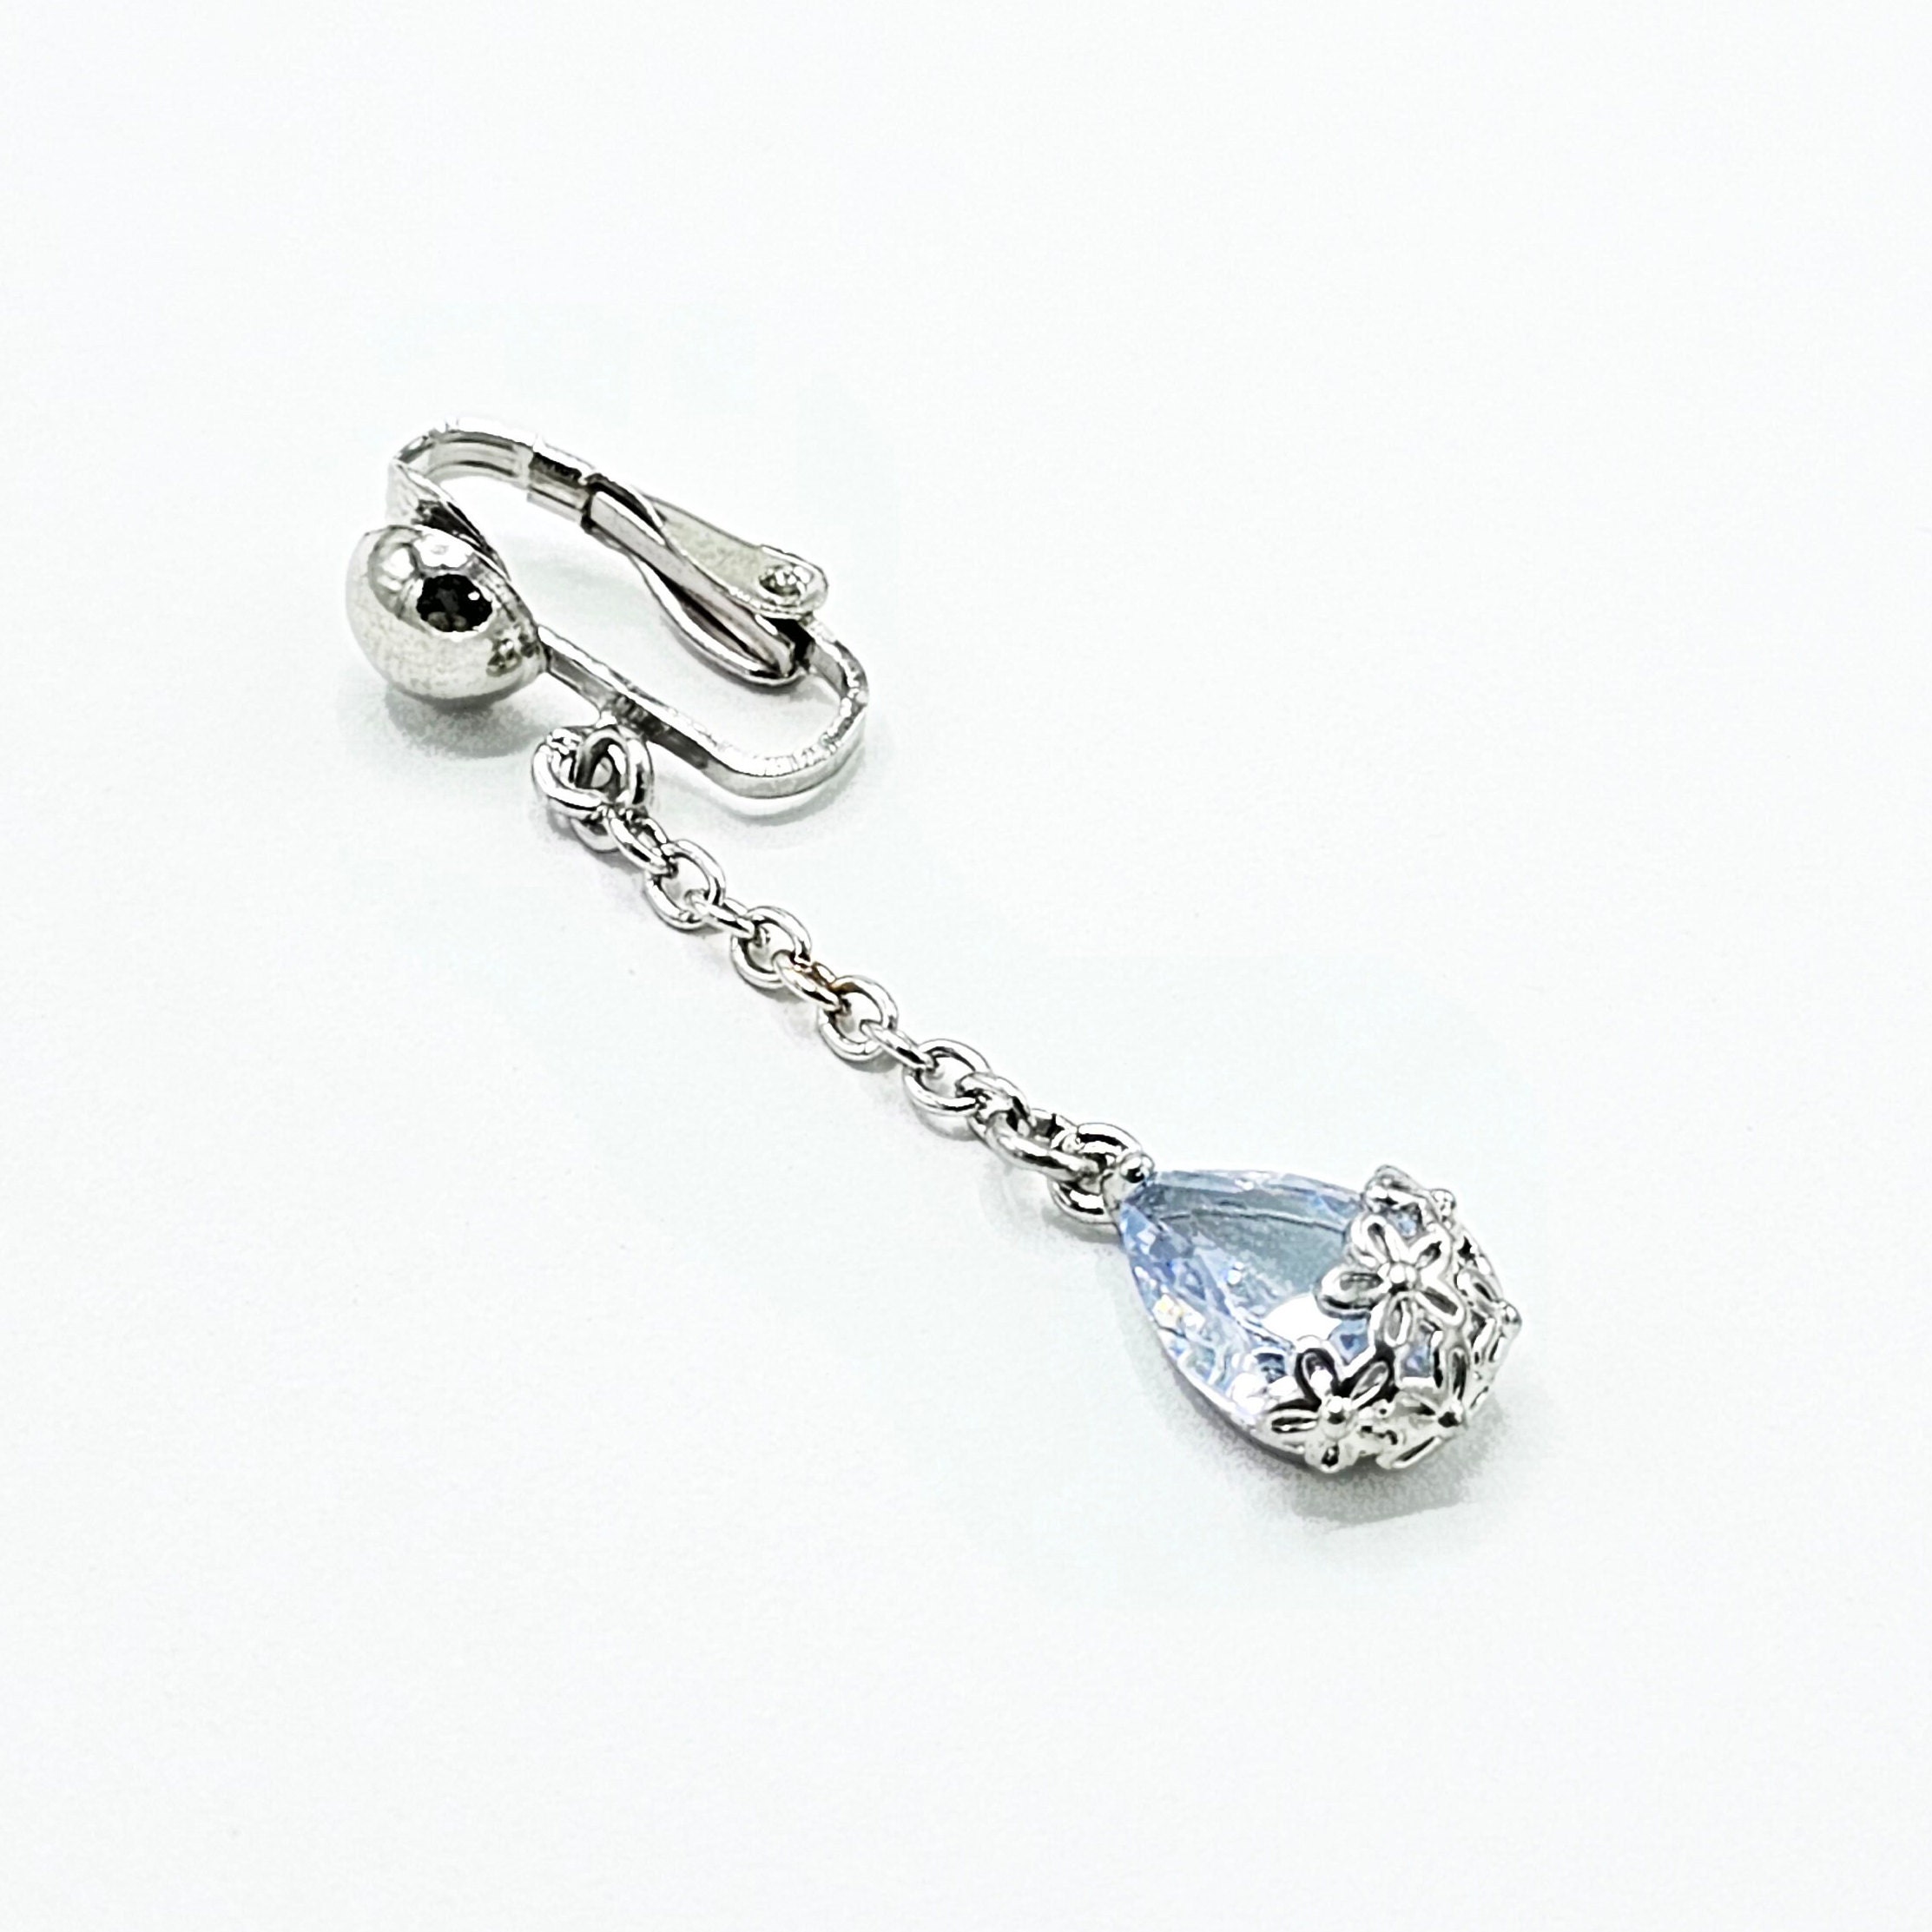 Non Piercing Vaginal Jewelry Clip with Cubic Zirconia Chain Dangle. VCH Clip, Intimate Clitoral Jewelry, MATURE, BDSM photo